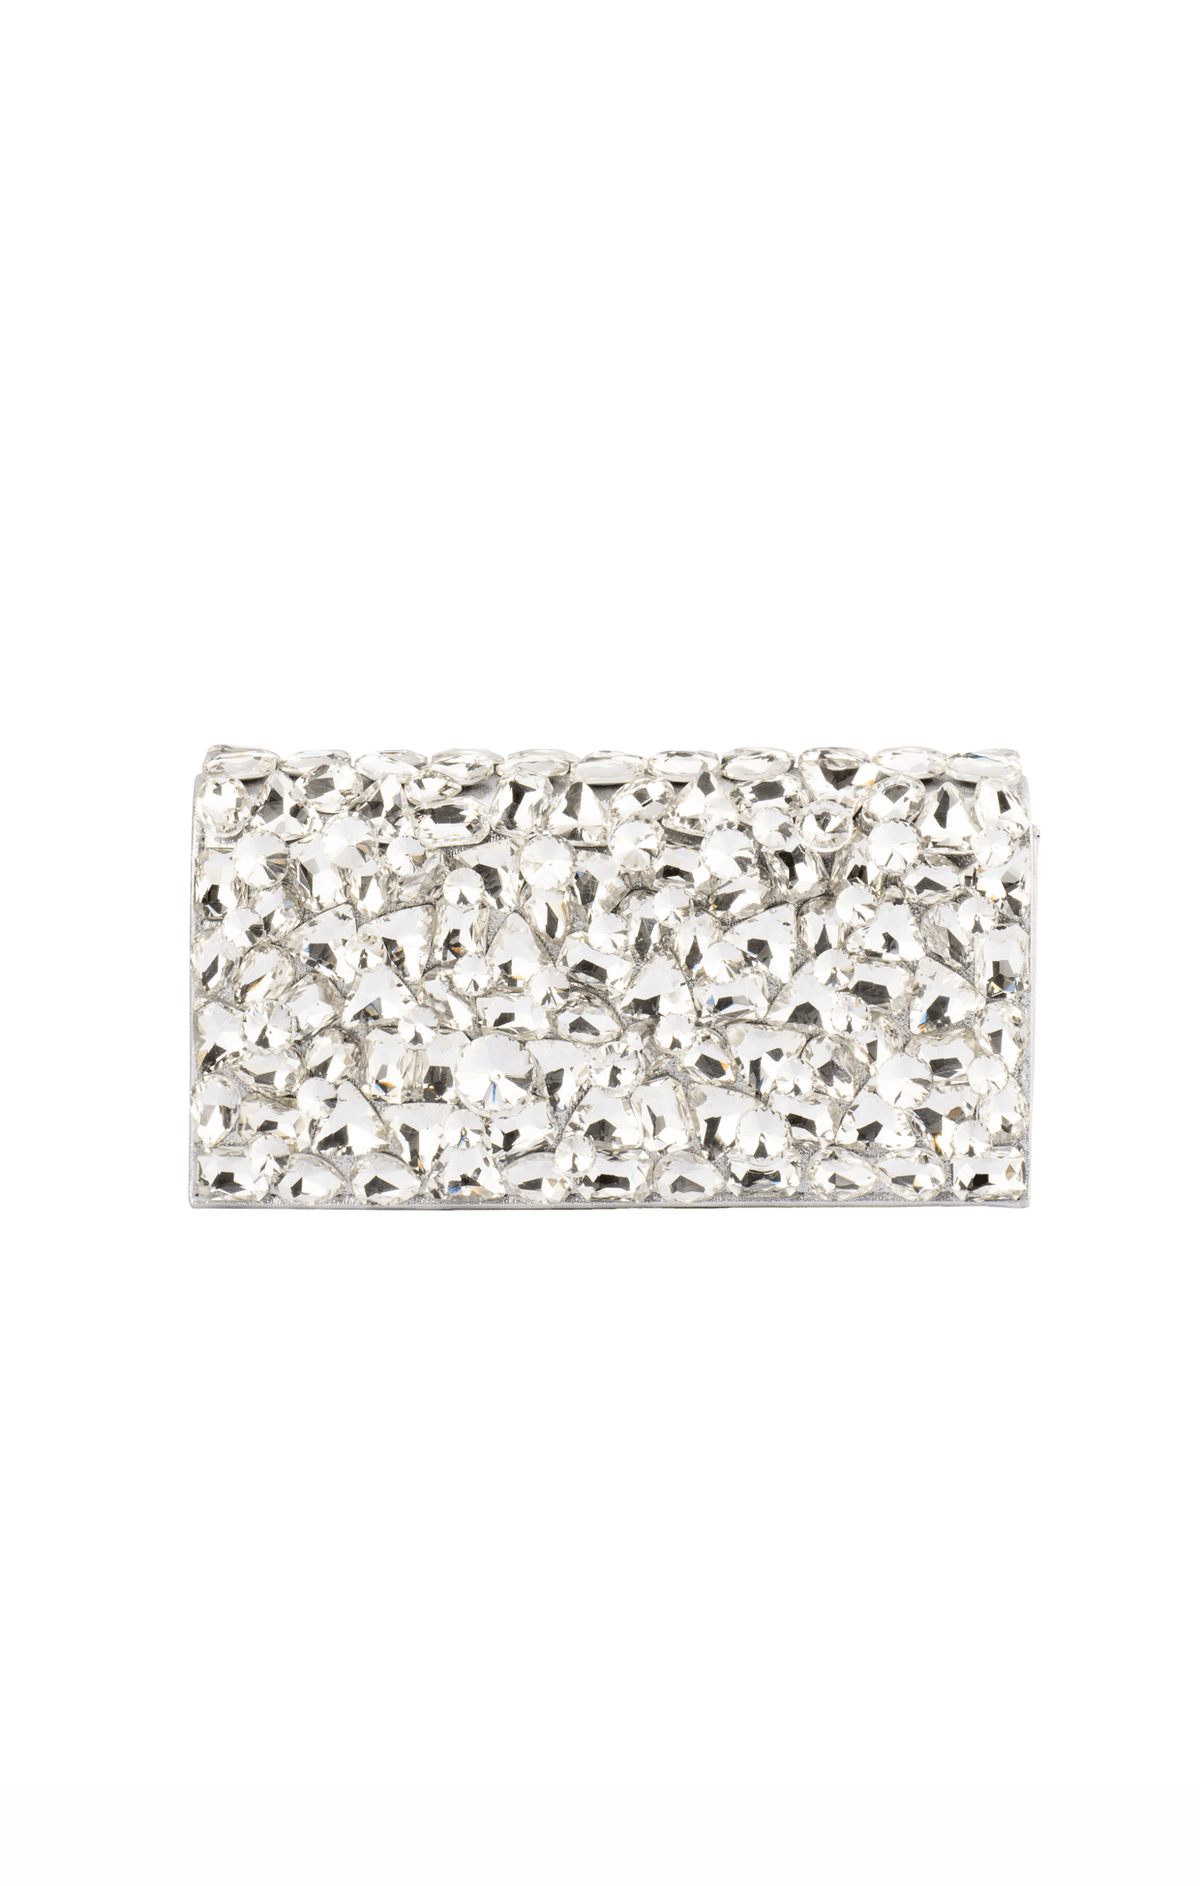 ACCESSORIES Bags Clutches OS / SILVER RENATA CRYSTAL ENCRUSTED CLUTCH IN SILVER